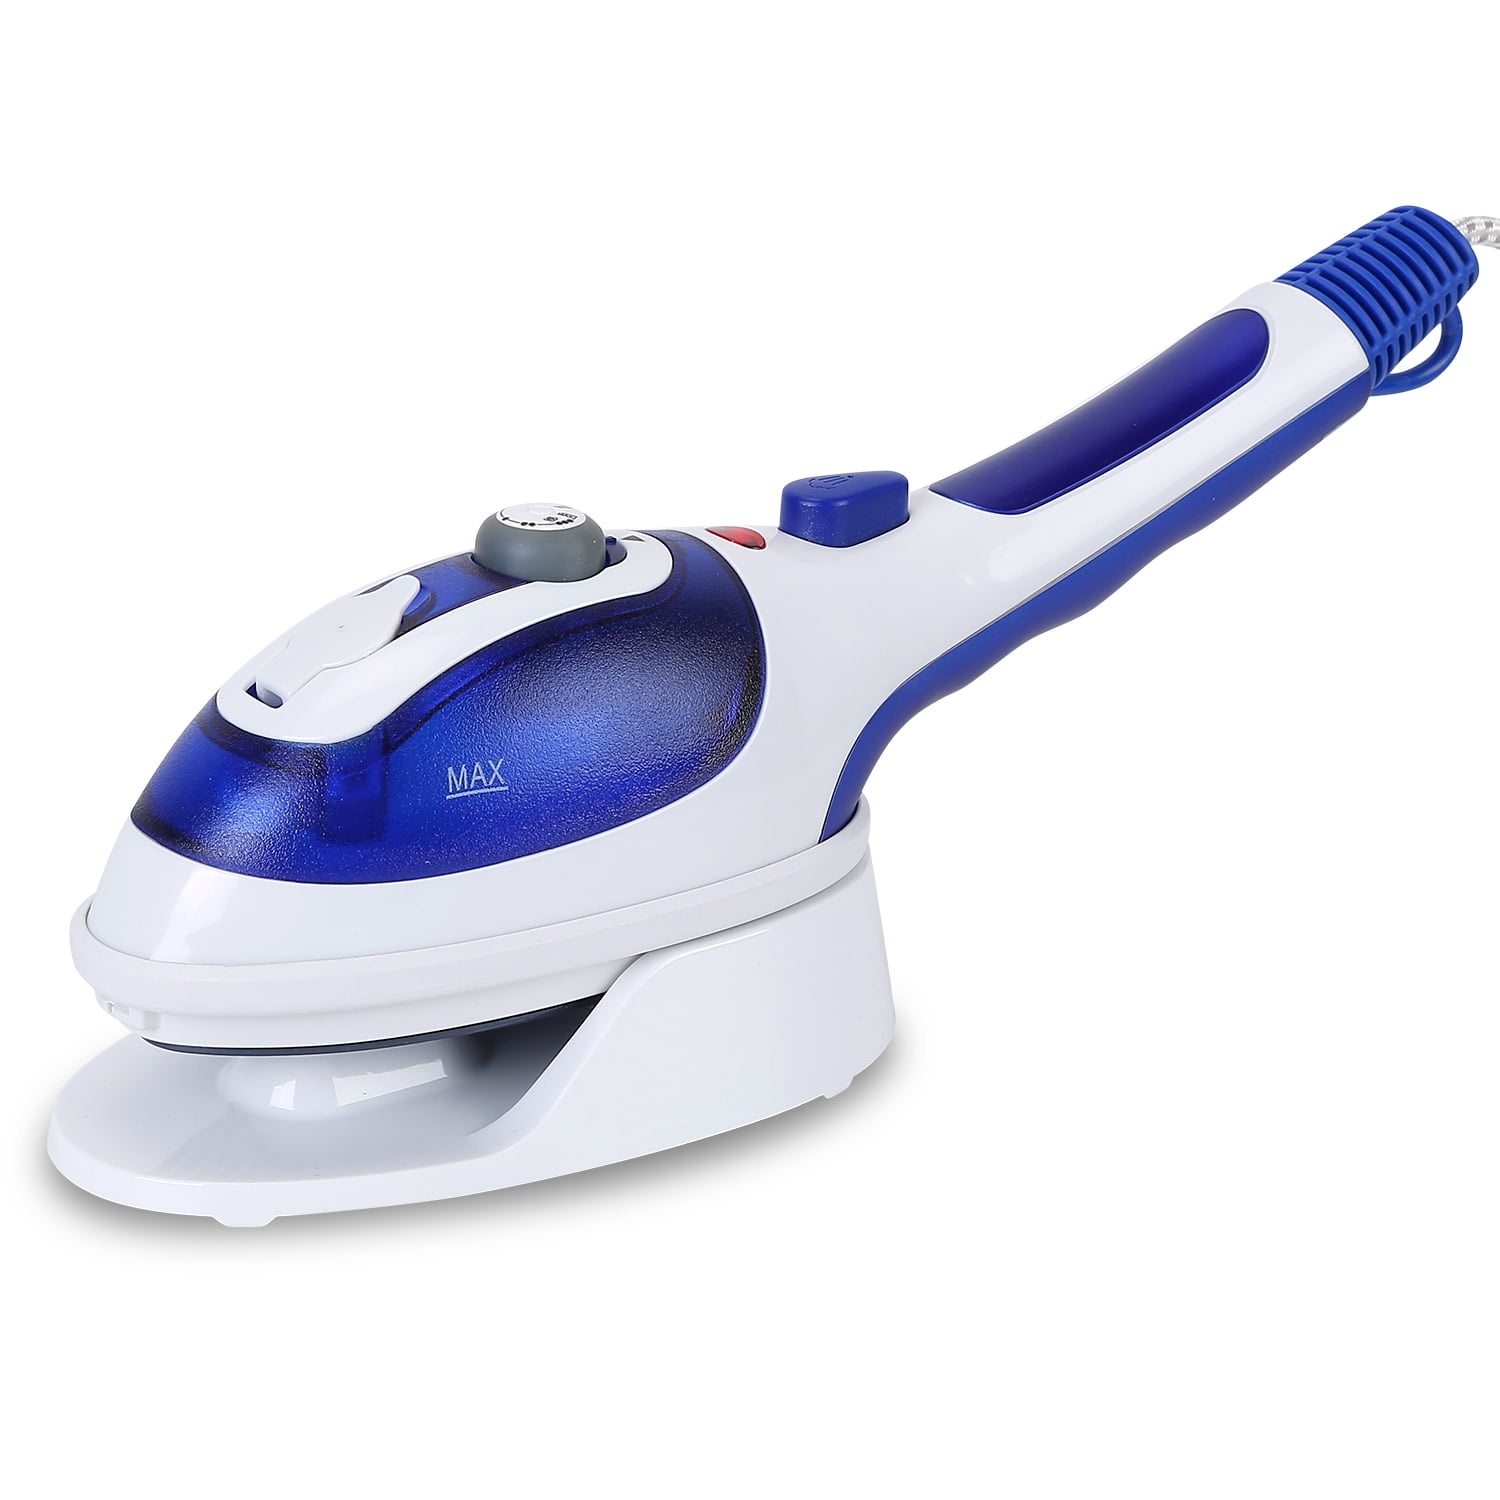 Singer Turquoise Plus 1600 W Steam Iron Price in India - Buy Singer  Turquoise Plus 1600 W Steam Iron Online at